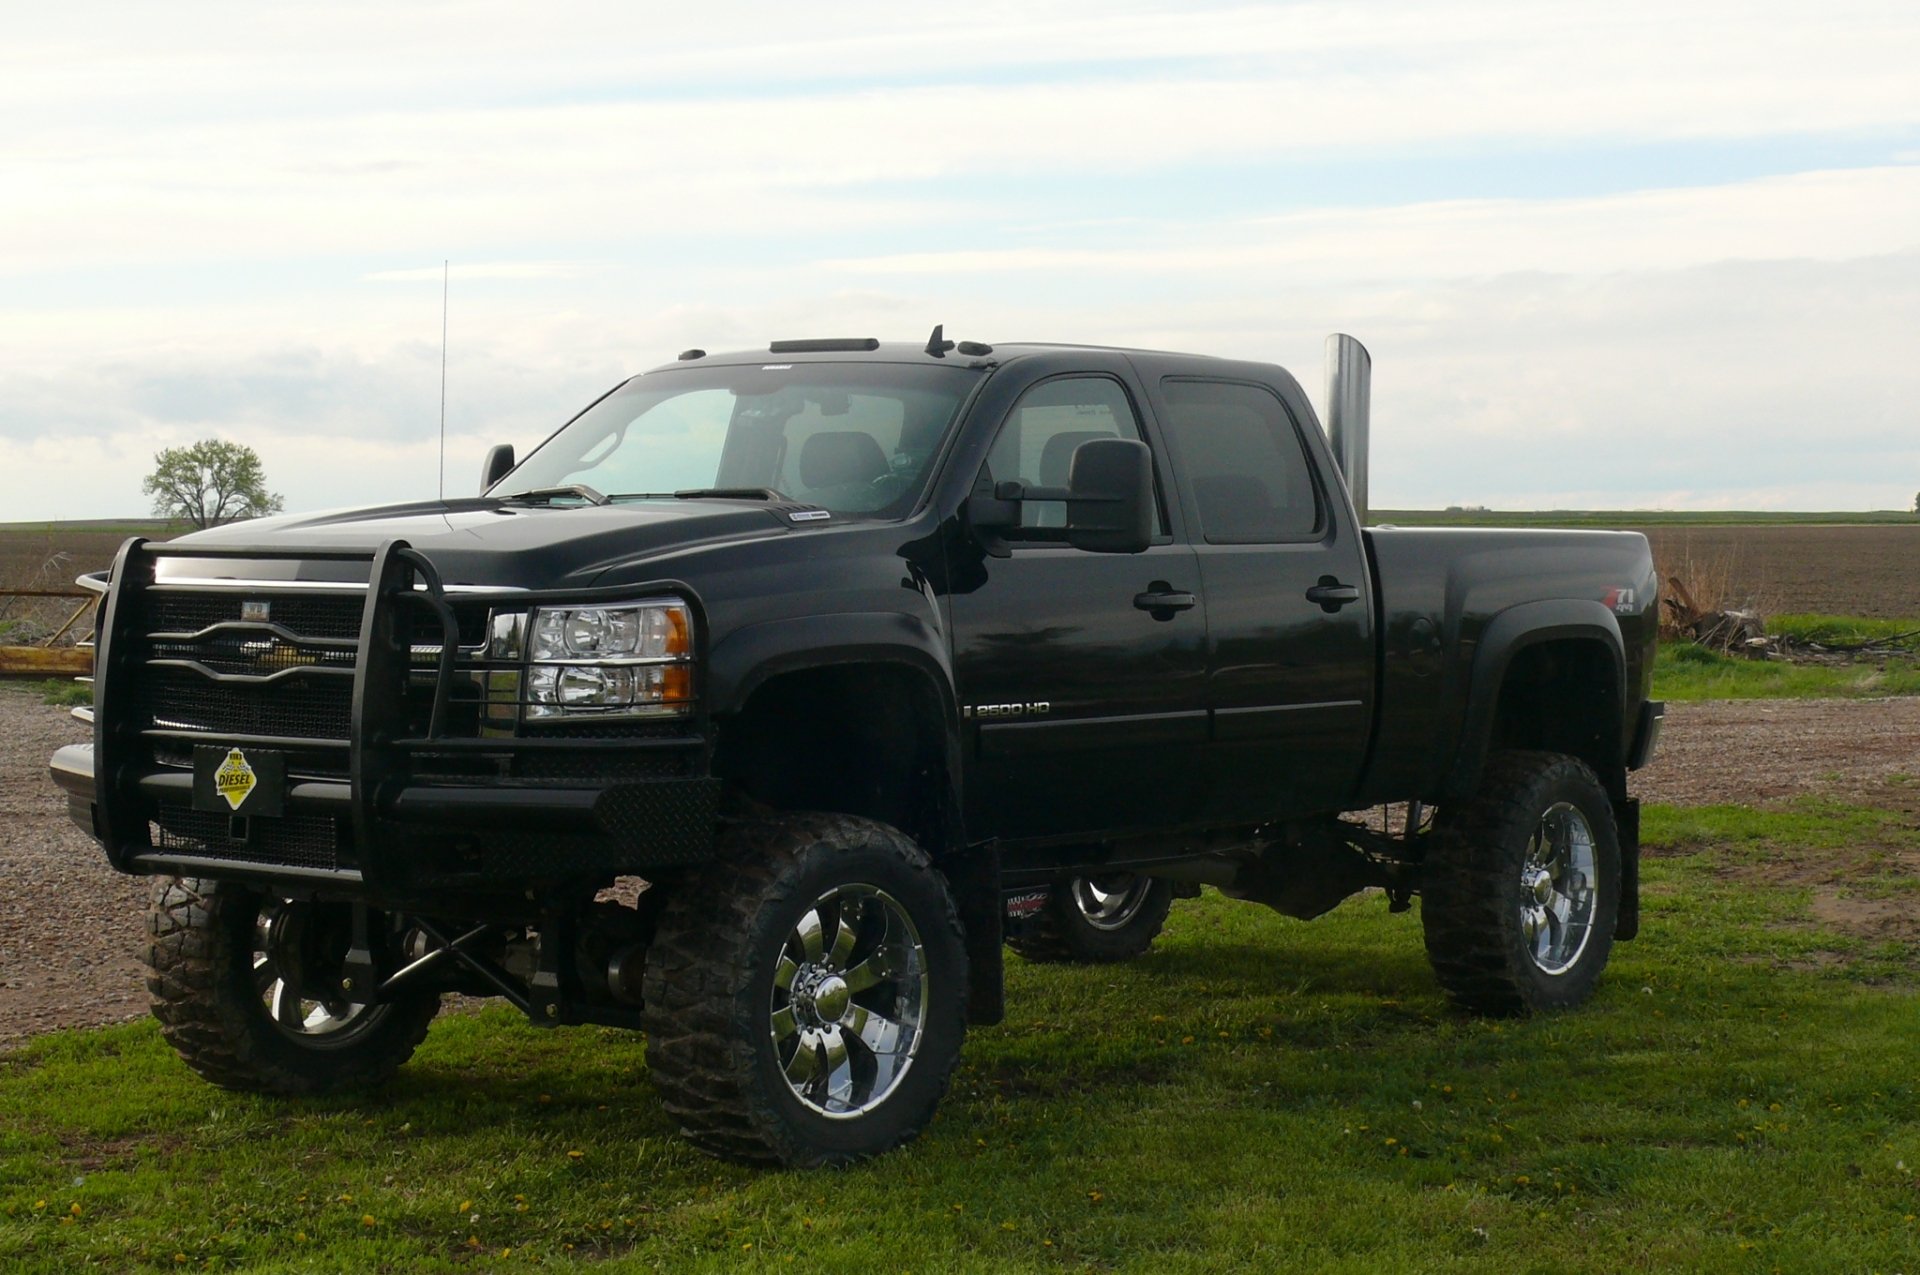 40 Chevrolet Silverado Hd Wallpapers Background Images